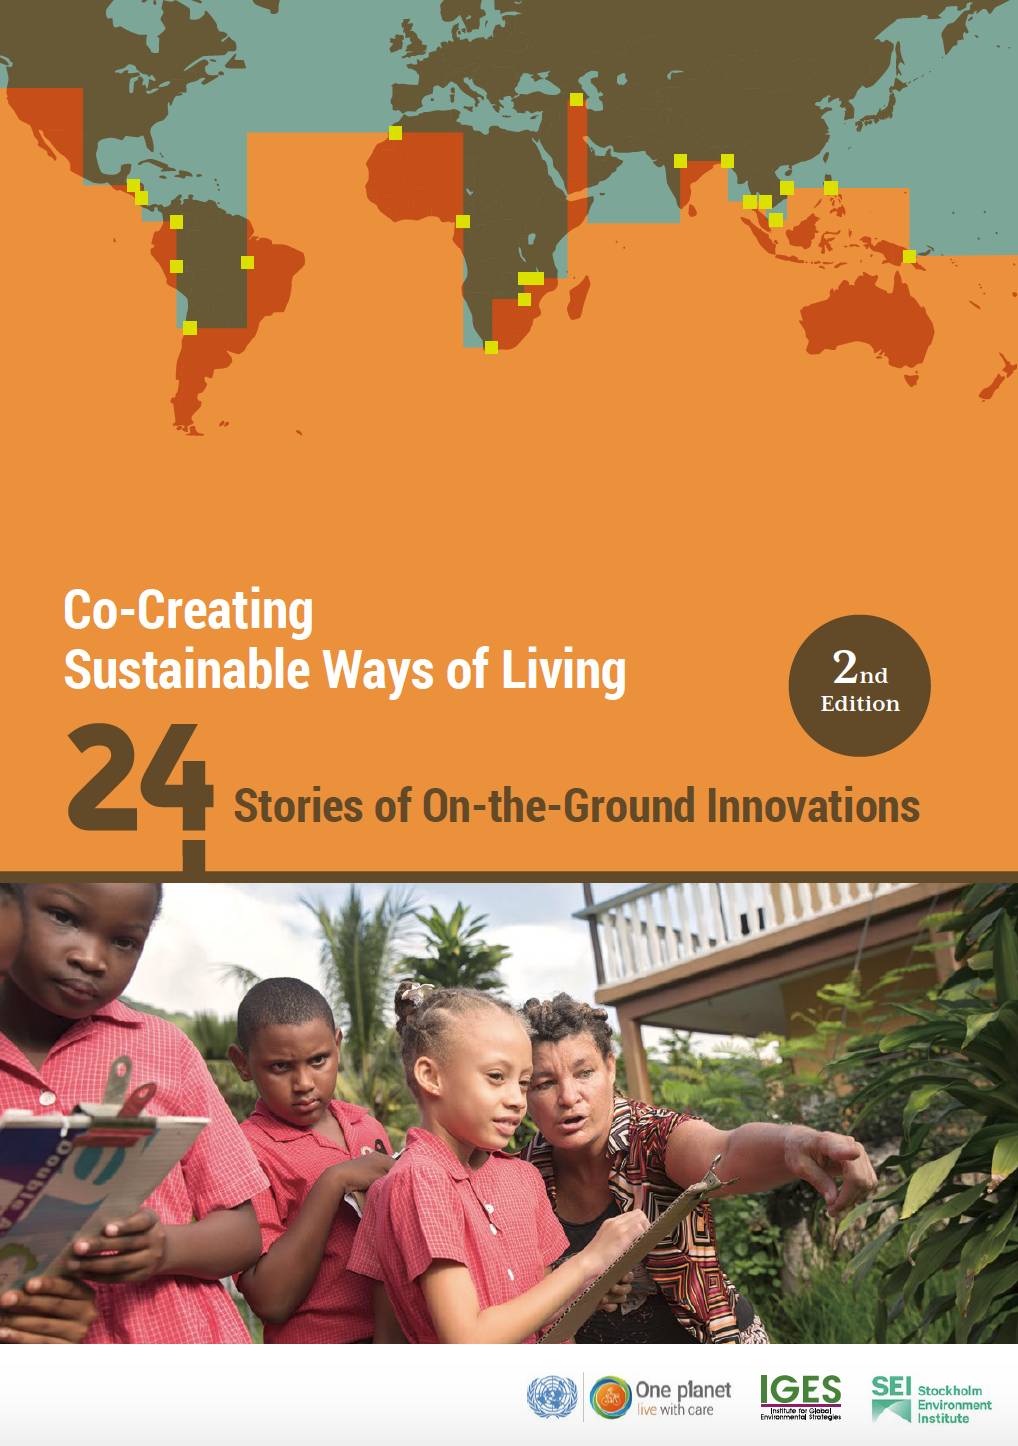 Co-Creating Sustainable Ways of Living